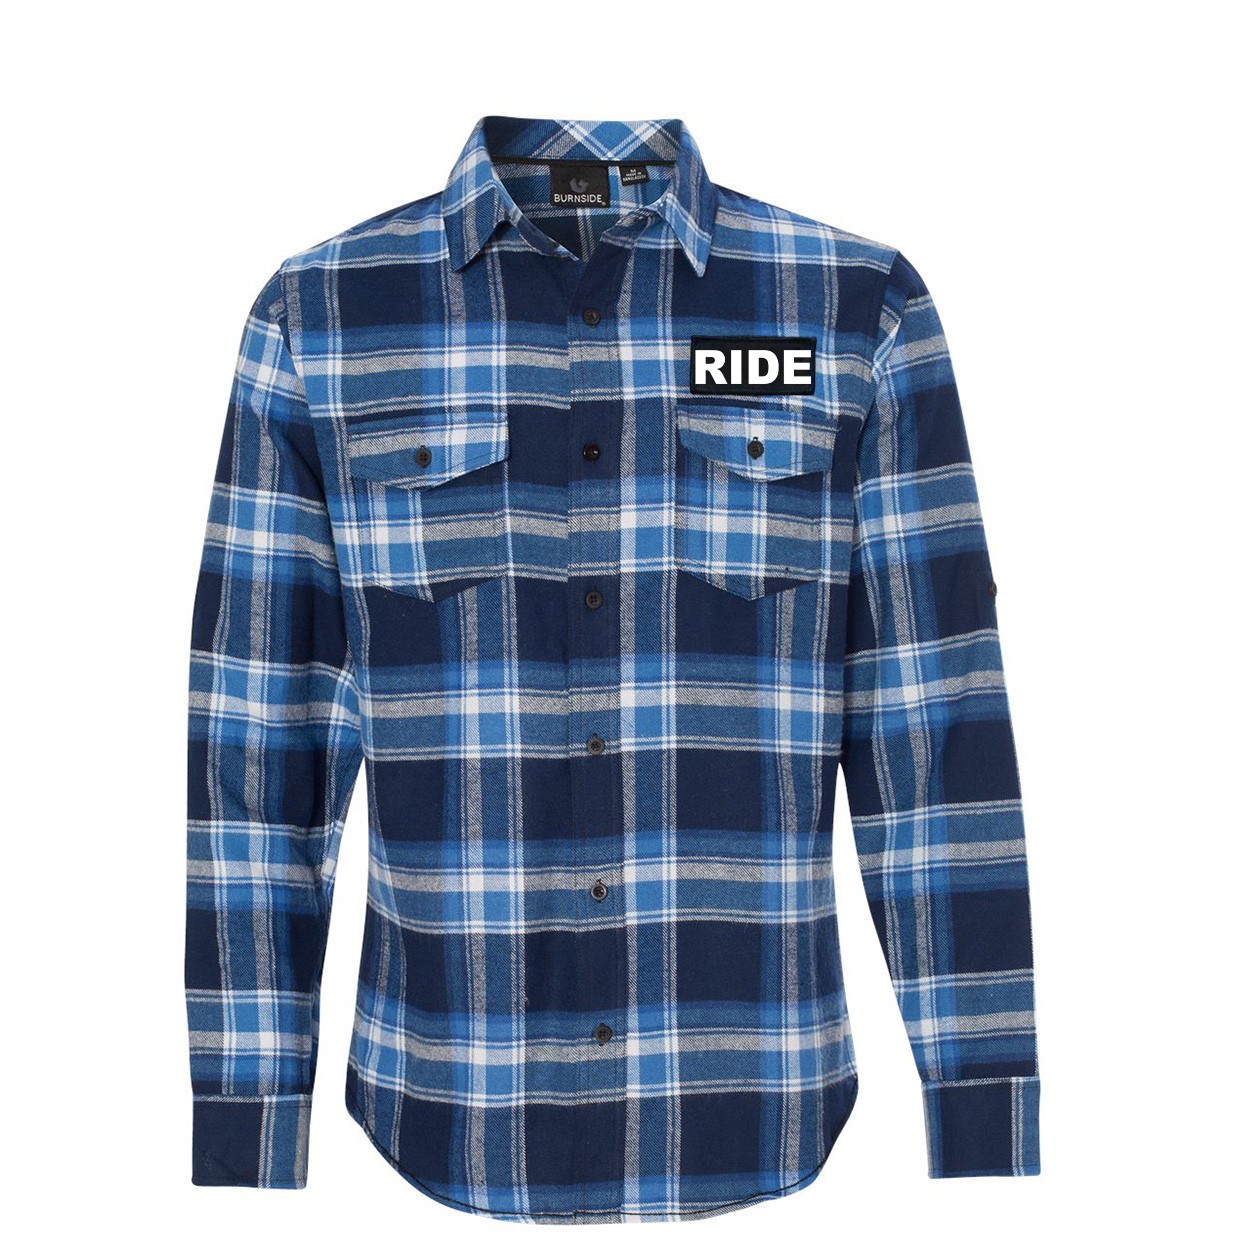 Ride Brand Logo Classic Unisex Long Sleeve Woven Patch Flannel Shirt Blue/White (White Logo)